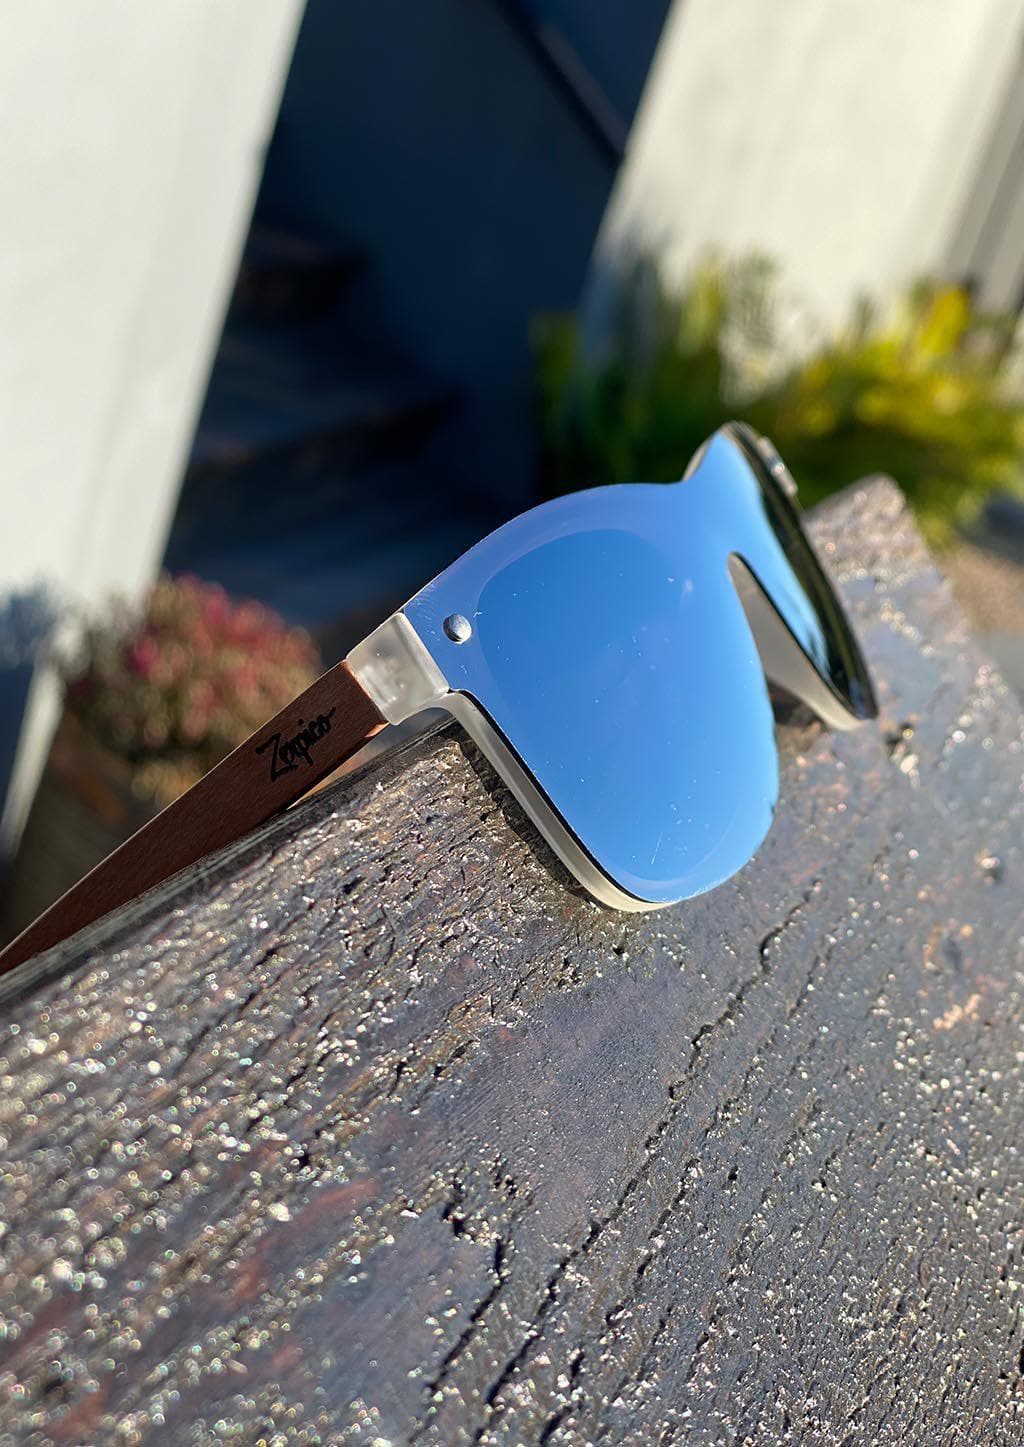 Eyewood tomorrow is our modern cool take on classic models. This is Perseus with silver mirror lenses. Nice wooden sunglasses outside in the sun in Sweden.